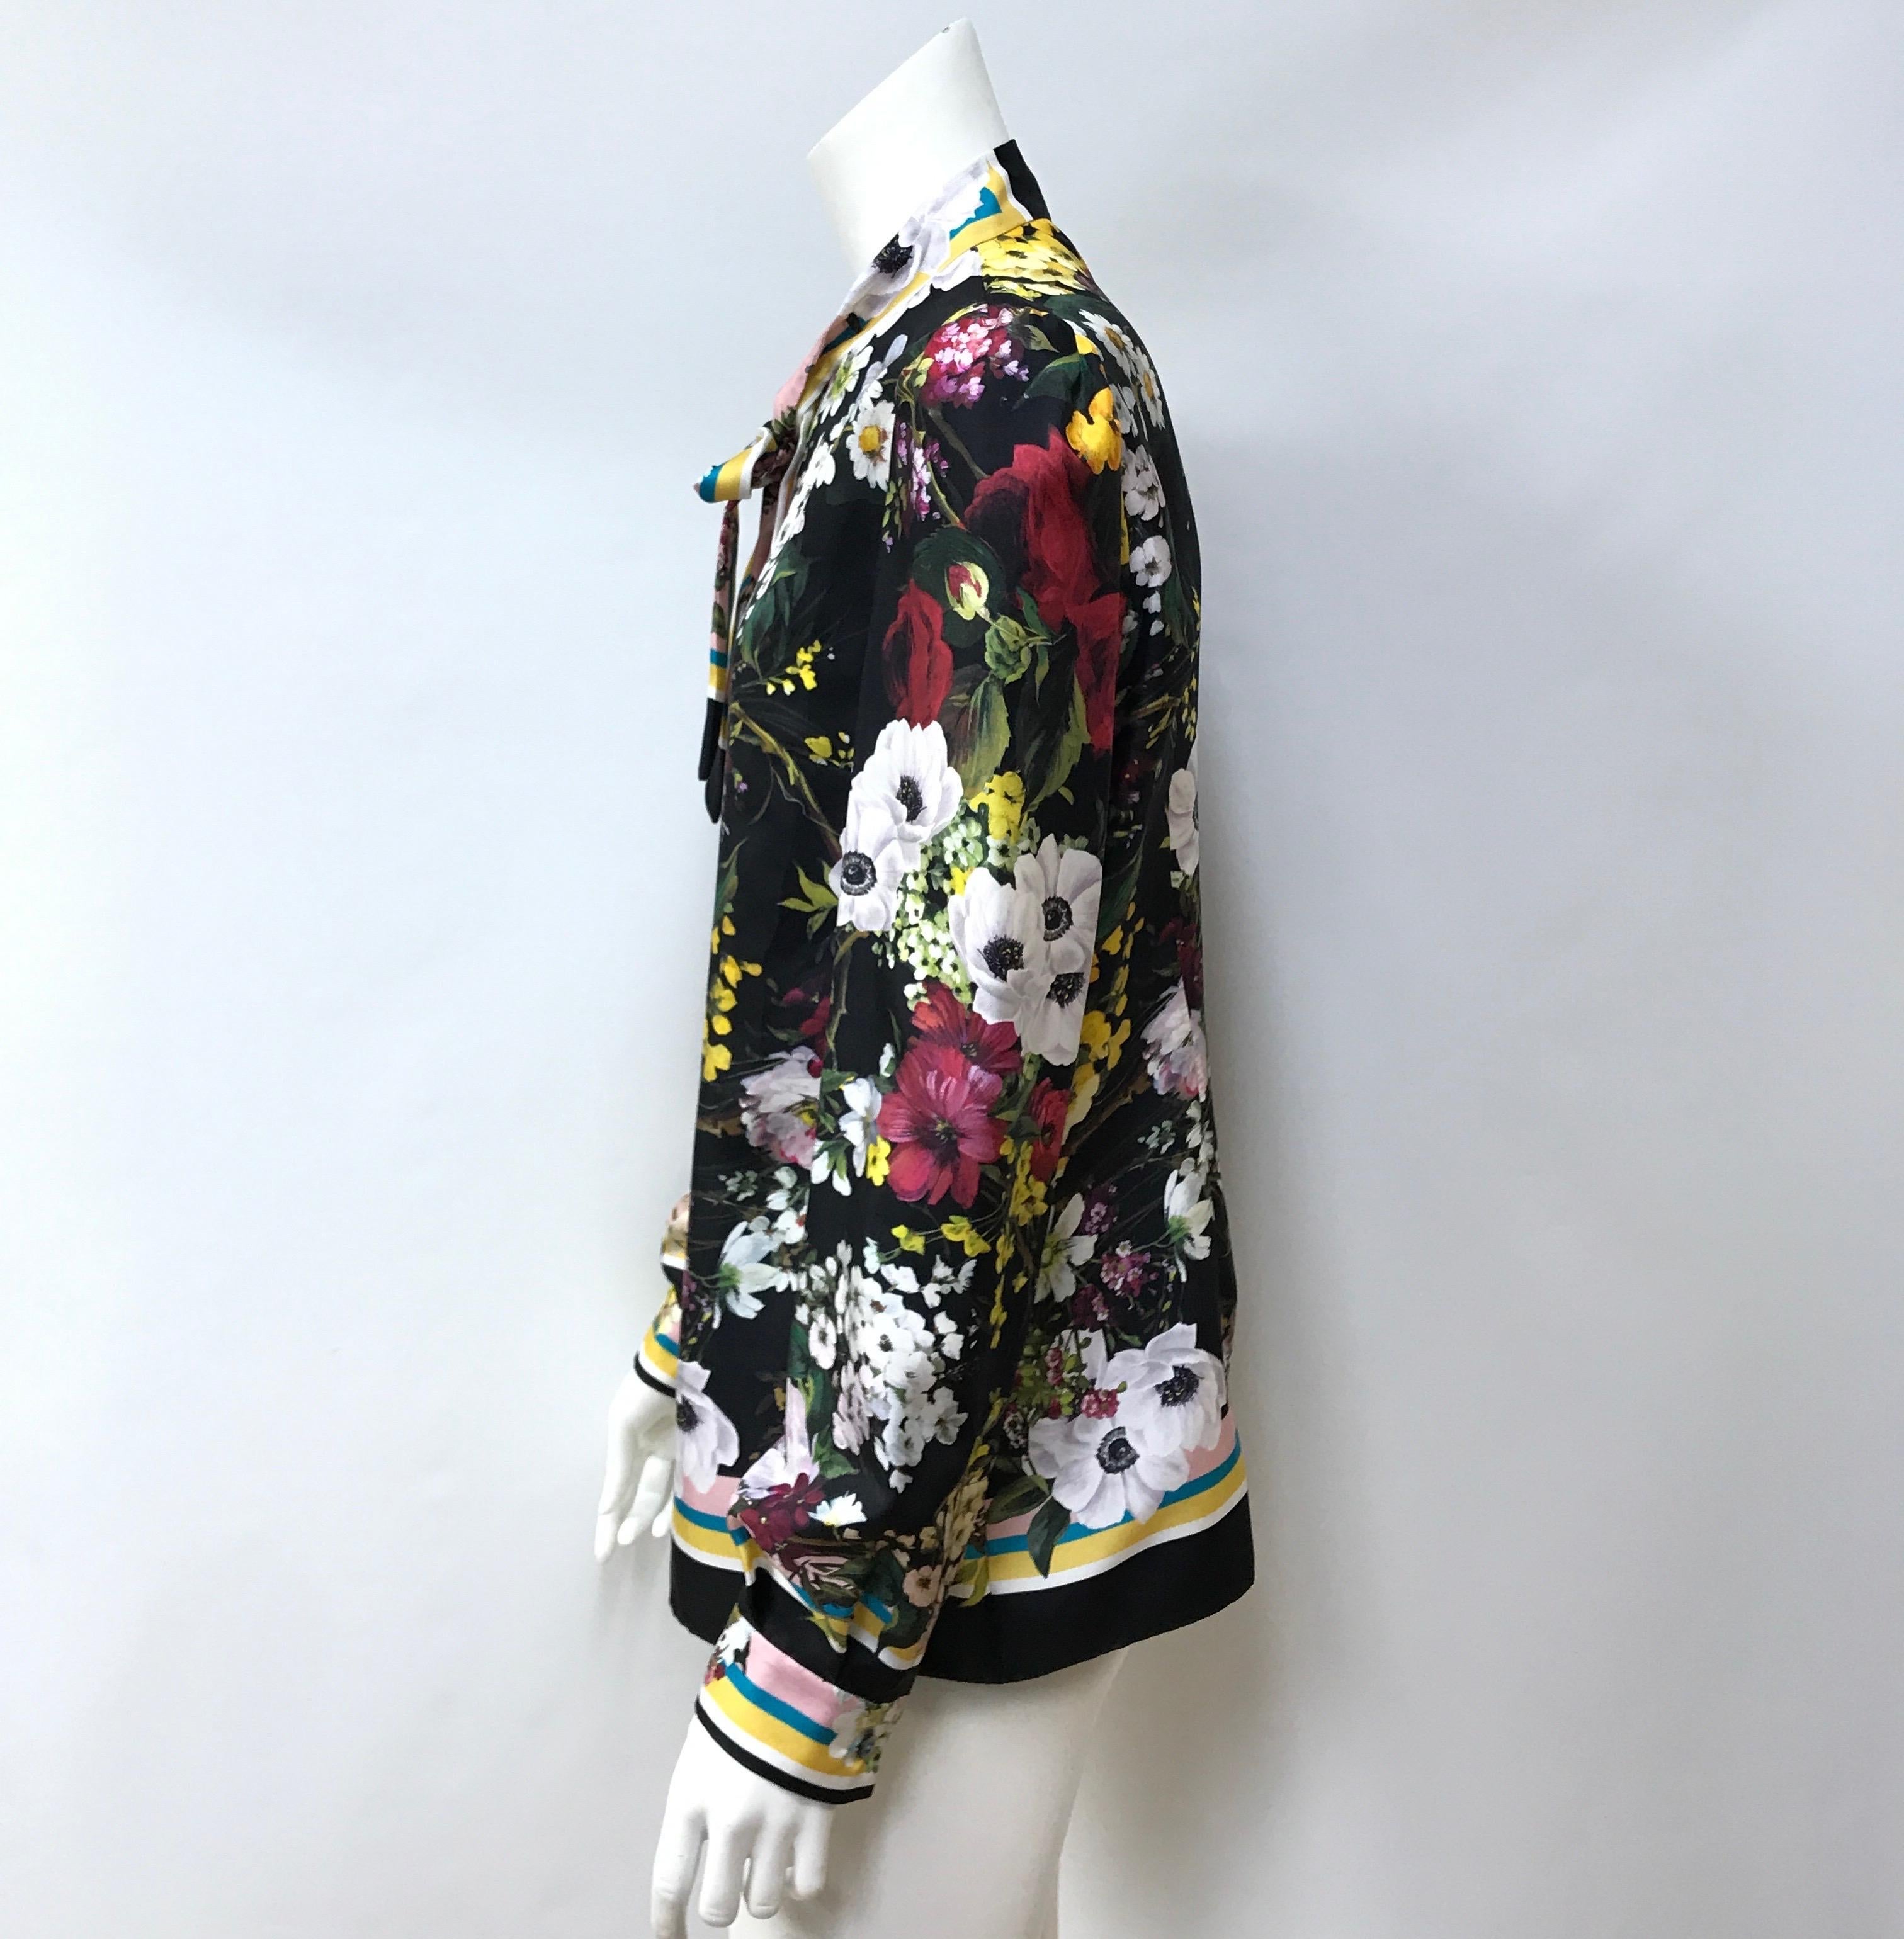 Dolce & Gabbana Multi Color Silk Floral Top-44. This Dolce & Gabbana top is in excellent condition. They are new with tags. This top is made of silk throughout and is black with a multi colored floral pattern. It is long sleeve with buttoned cuffs.